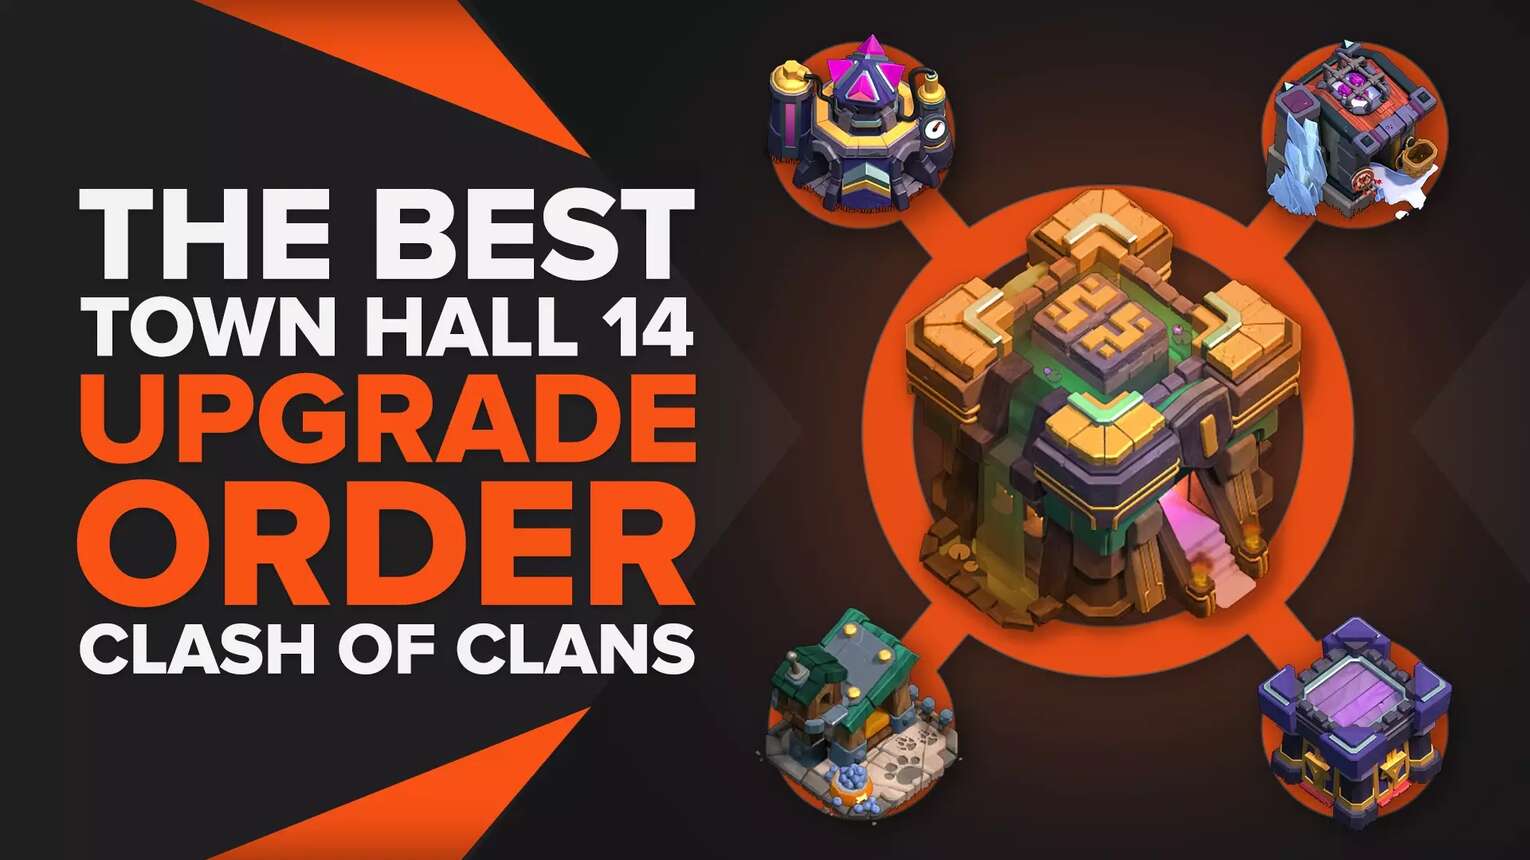 See The Best Town Hall 14 Upgrade Order In Clash Of Clans!